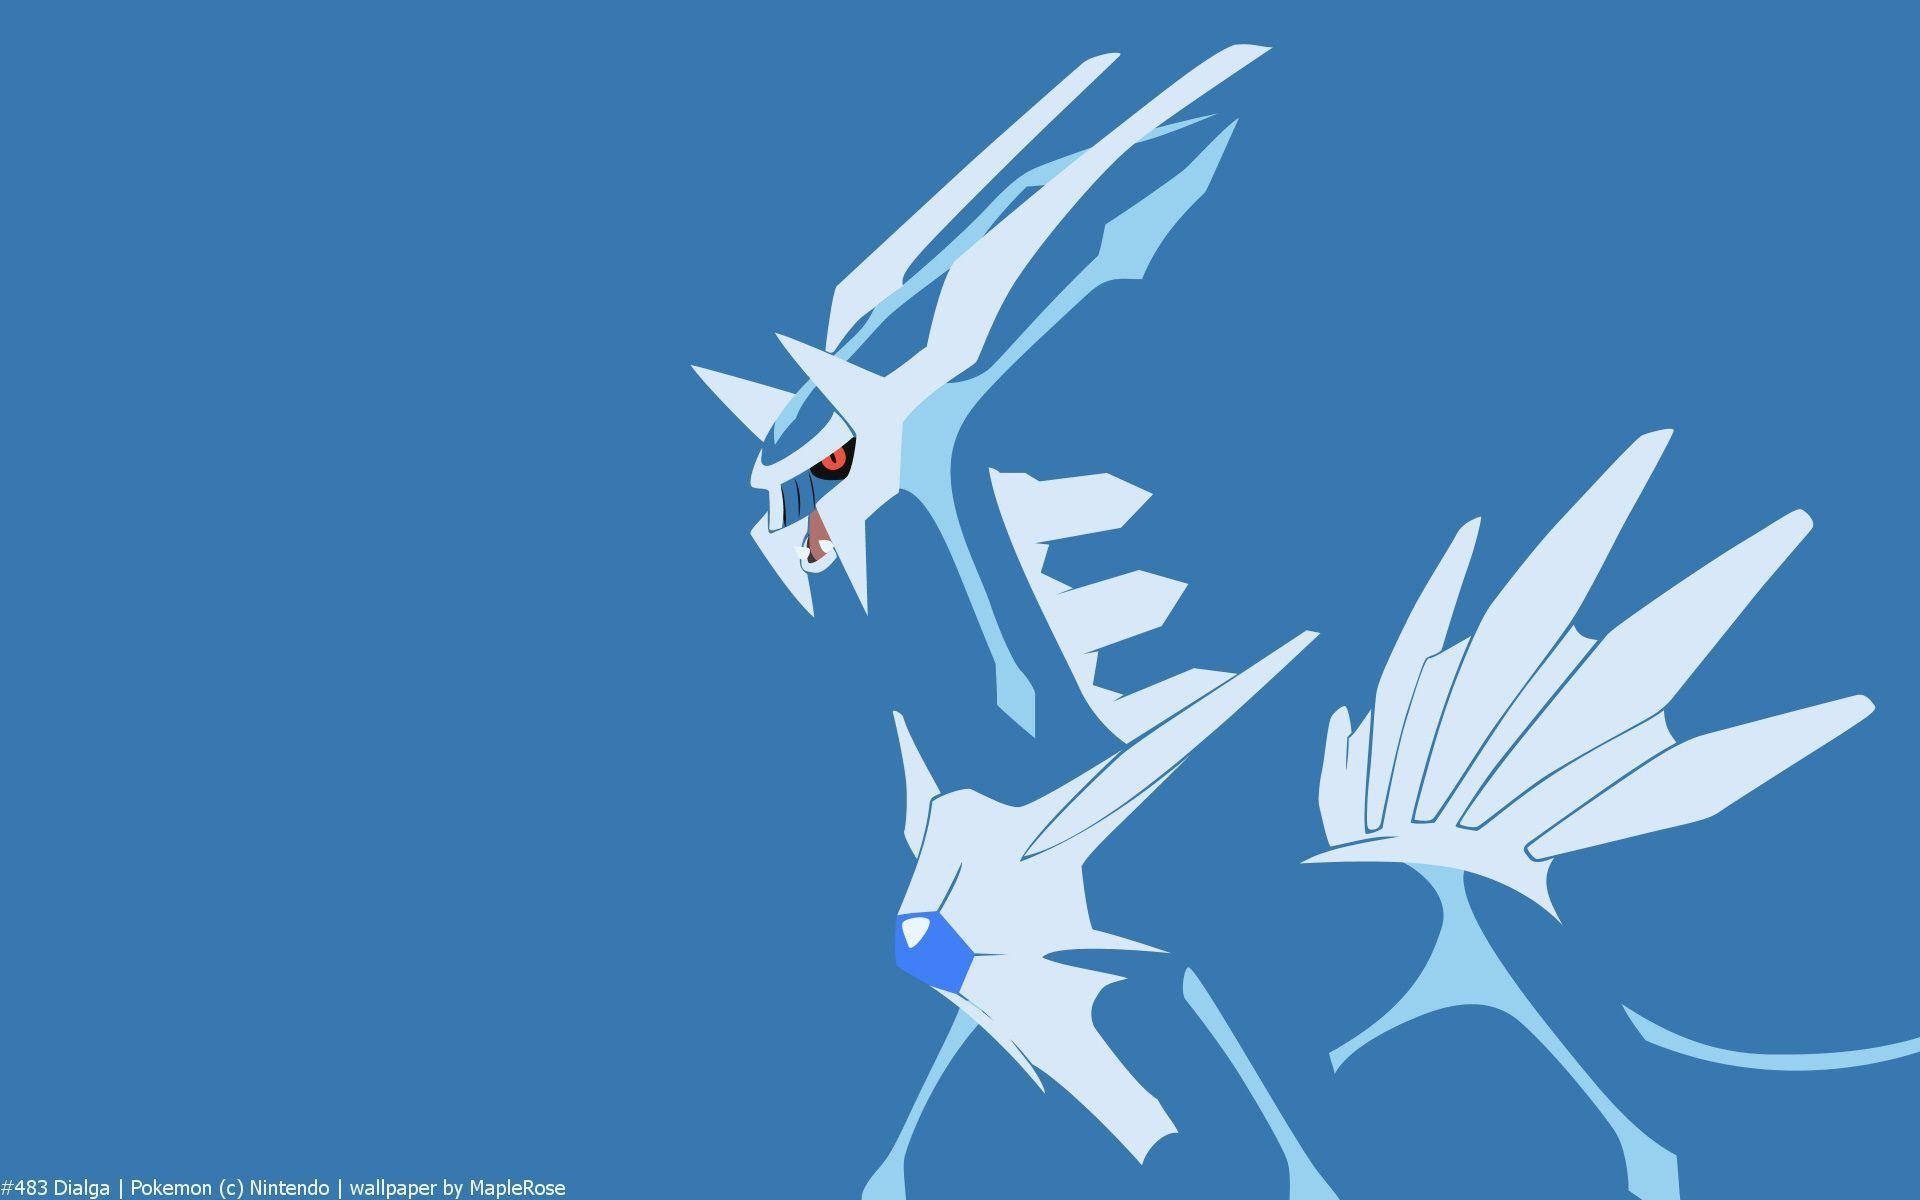 Intimidating Yet Awe-inspiring, Dialga Stands Proud In A Deep Blue Color. Background